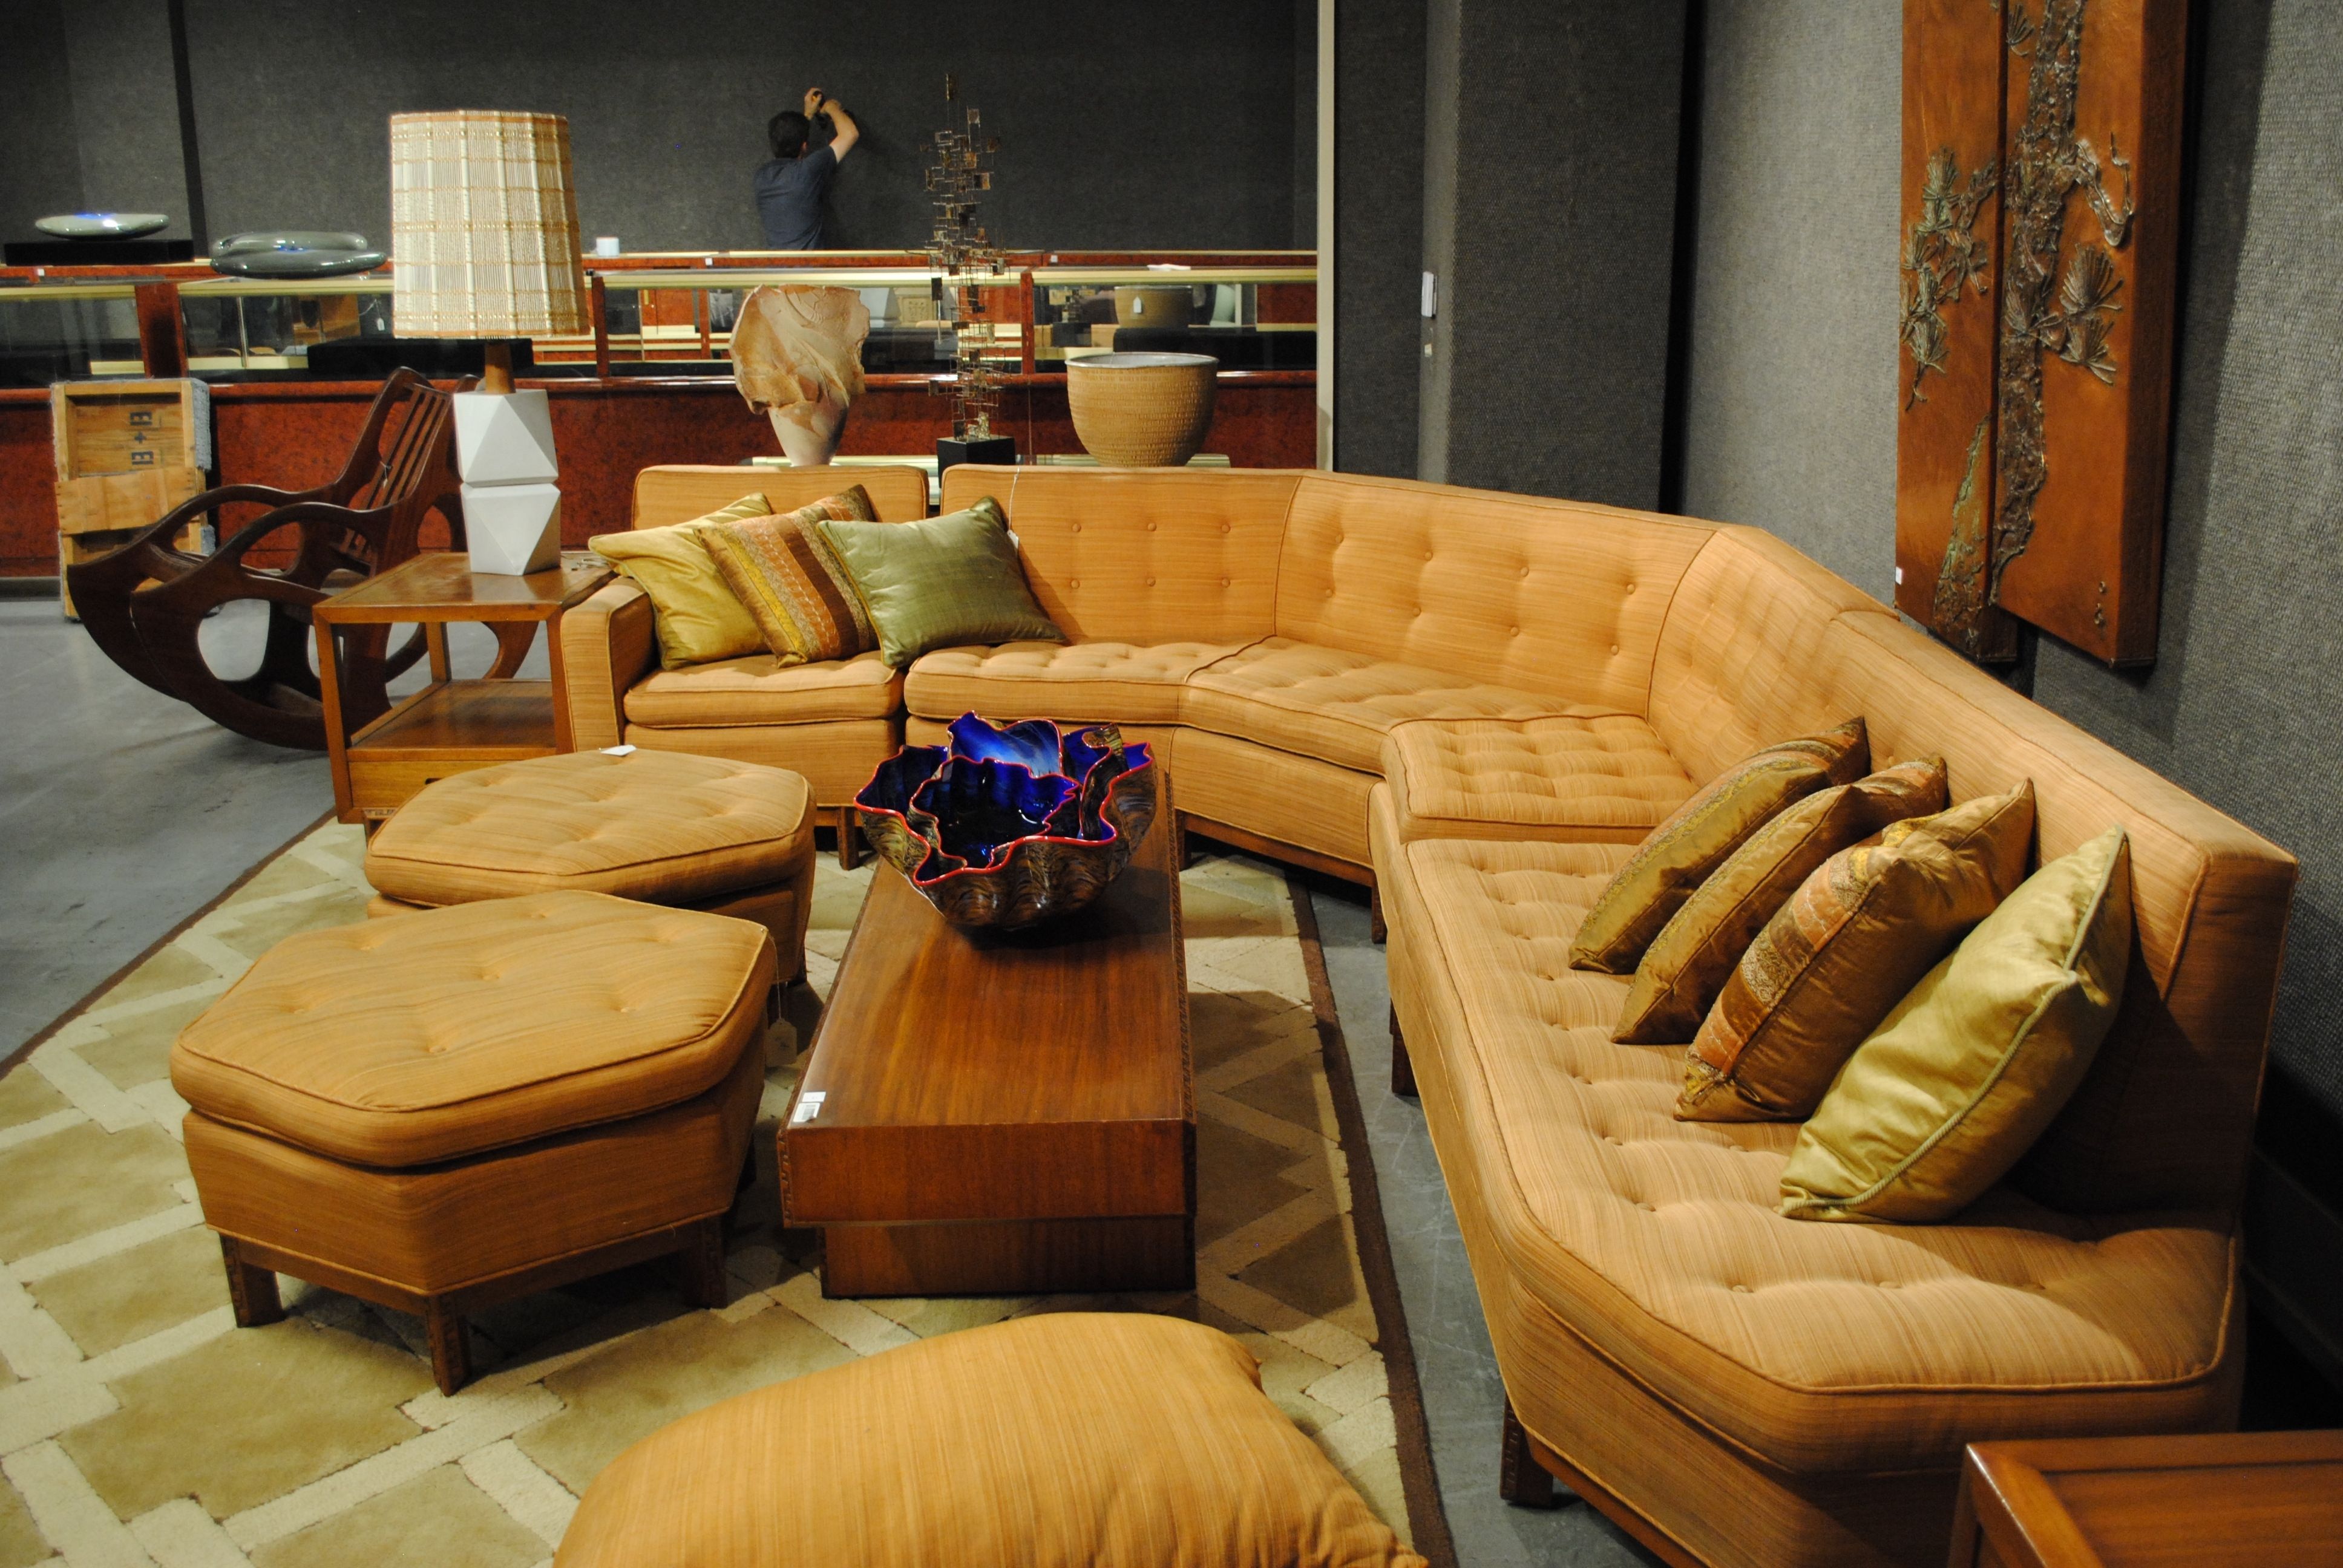 Vintage 1950s Sectional Sofa | Sofa Ideas In Vintage Sectional Sofas (View 5 of 10)